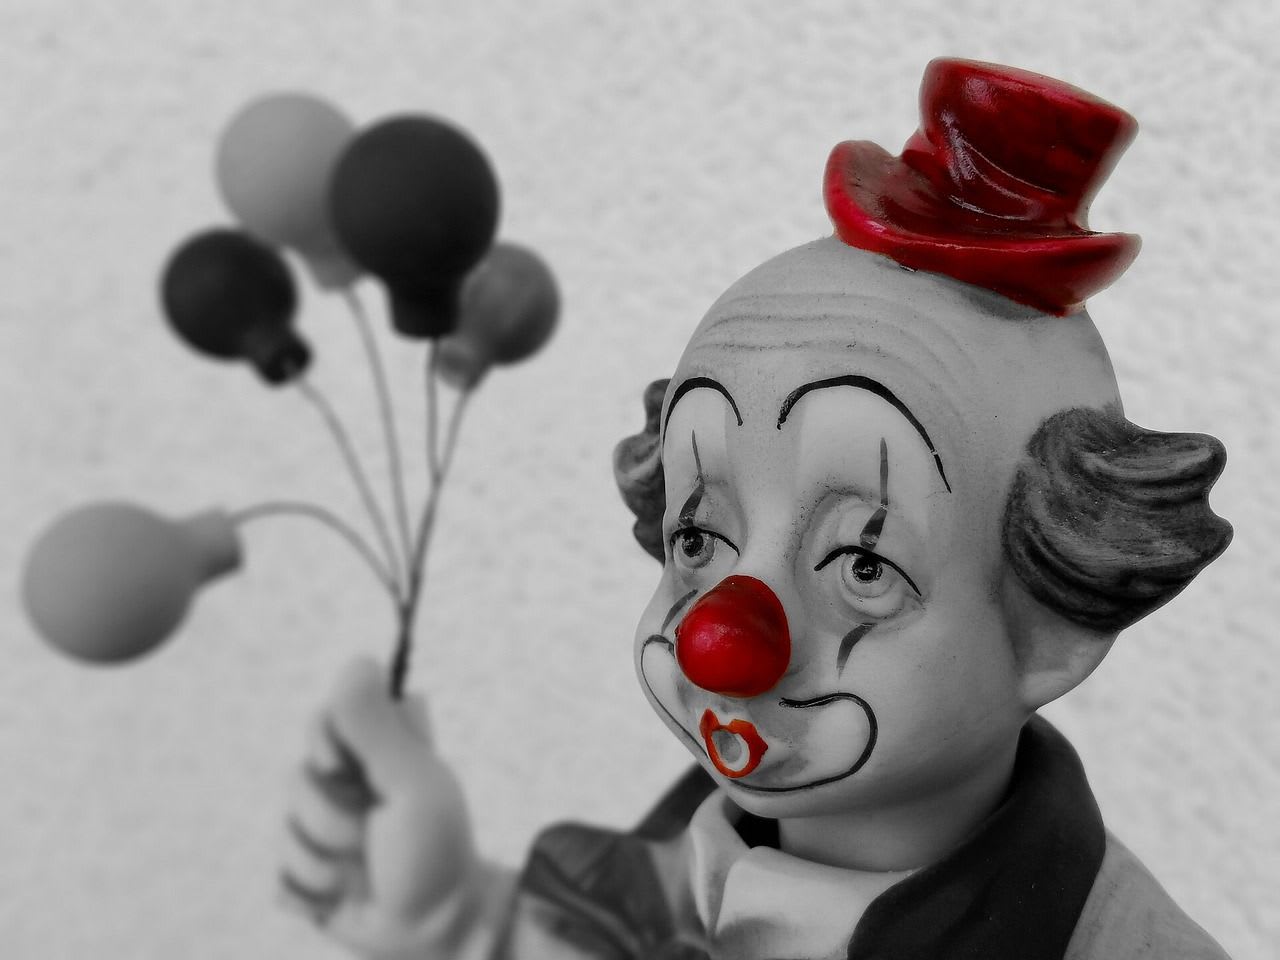 a clown figurine with a red nose